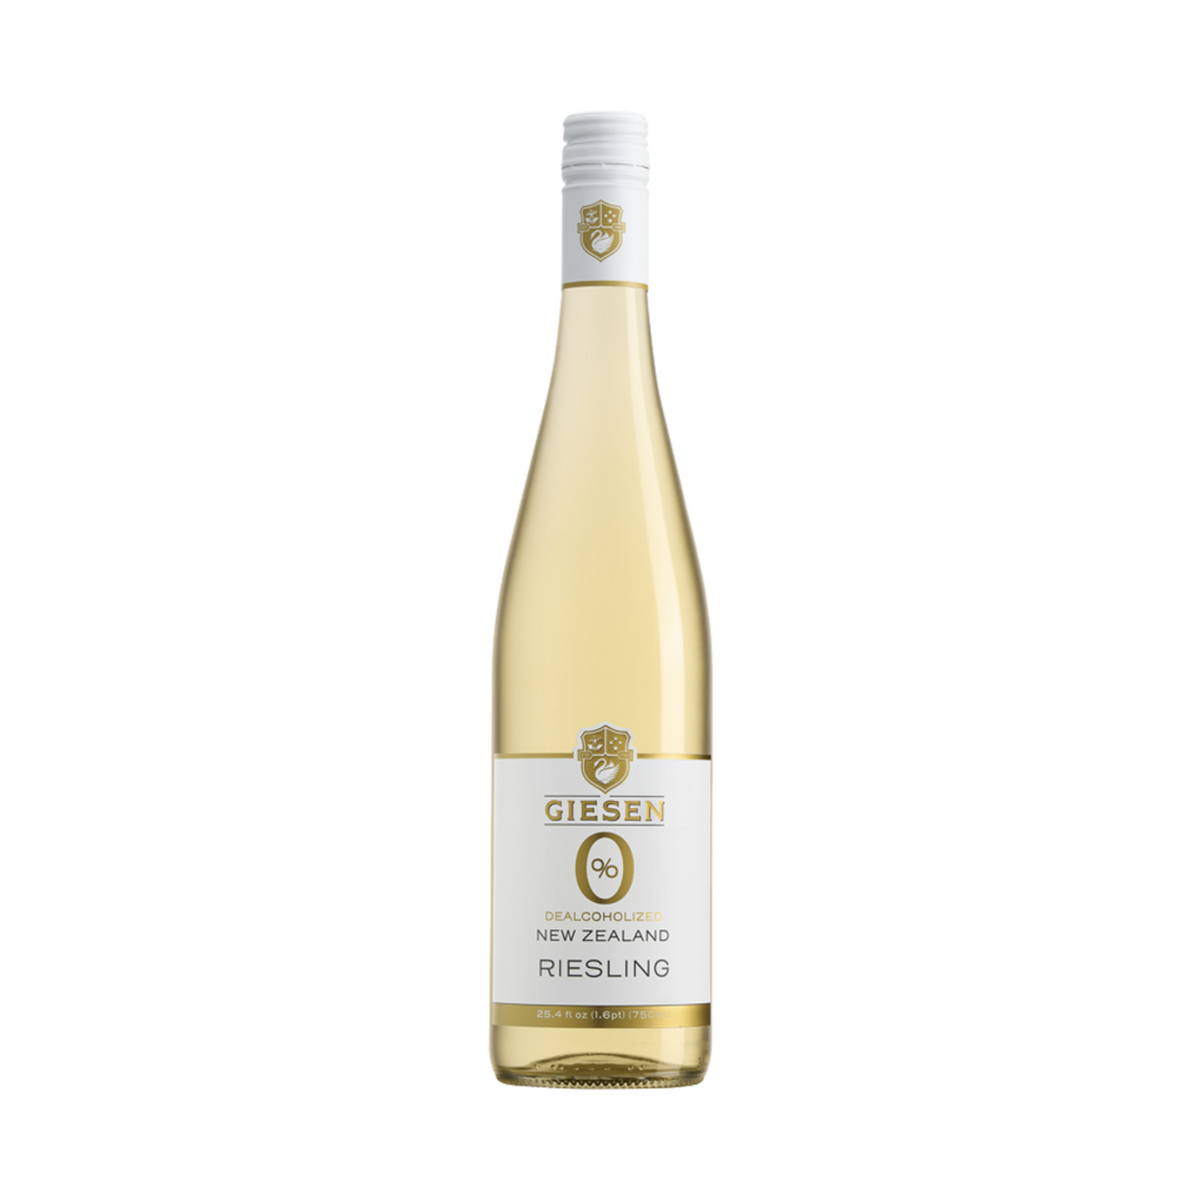 Giesen 0% Riesling | Non-Alcoholic